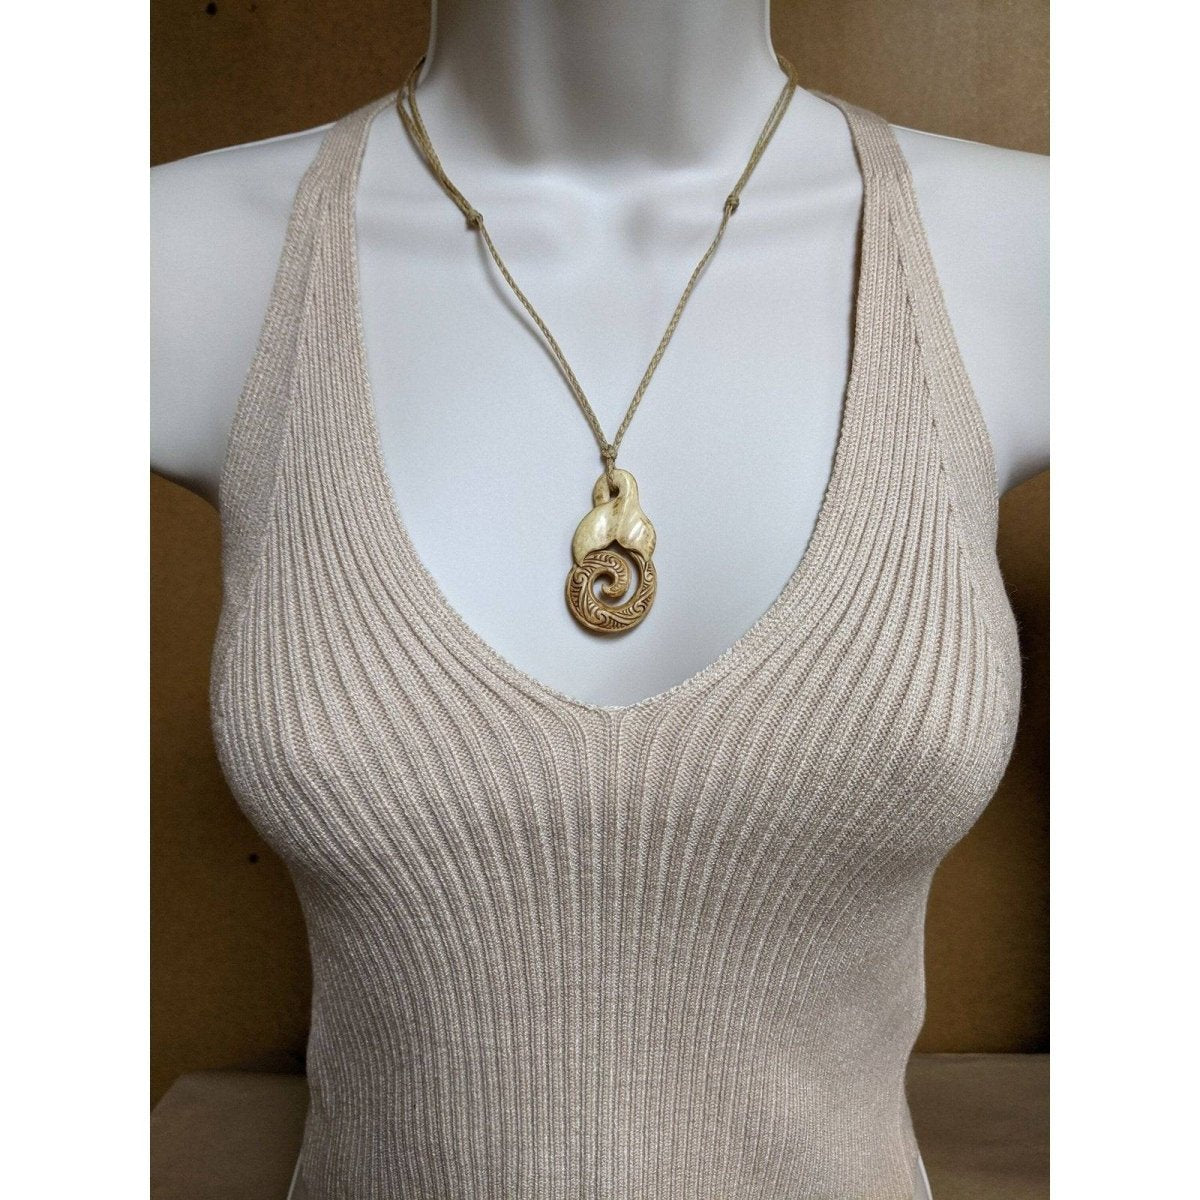 New Zealand Maori Inspired Bone, Infinity Spiral Stylized Whale Tail Necklace - Earthbound Pacific